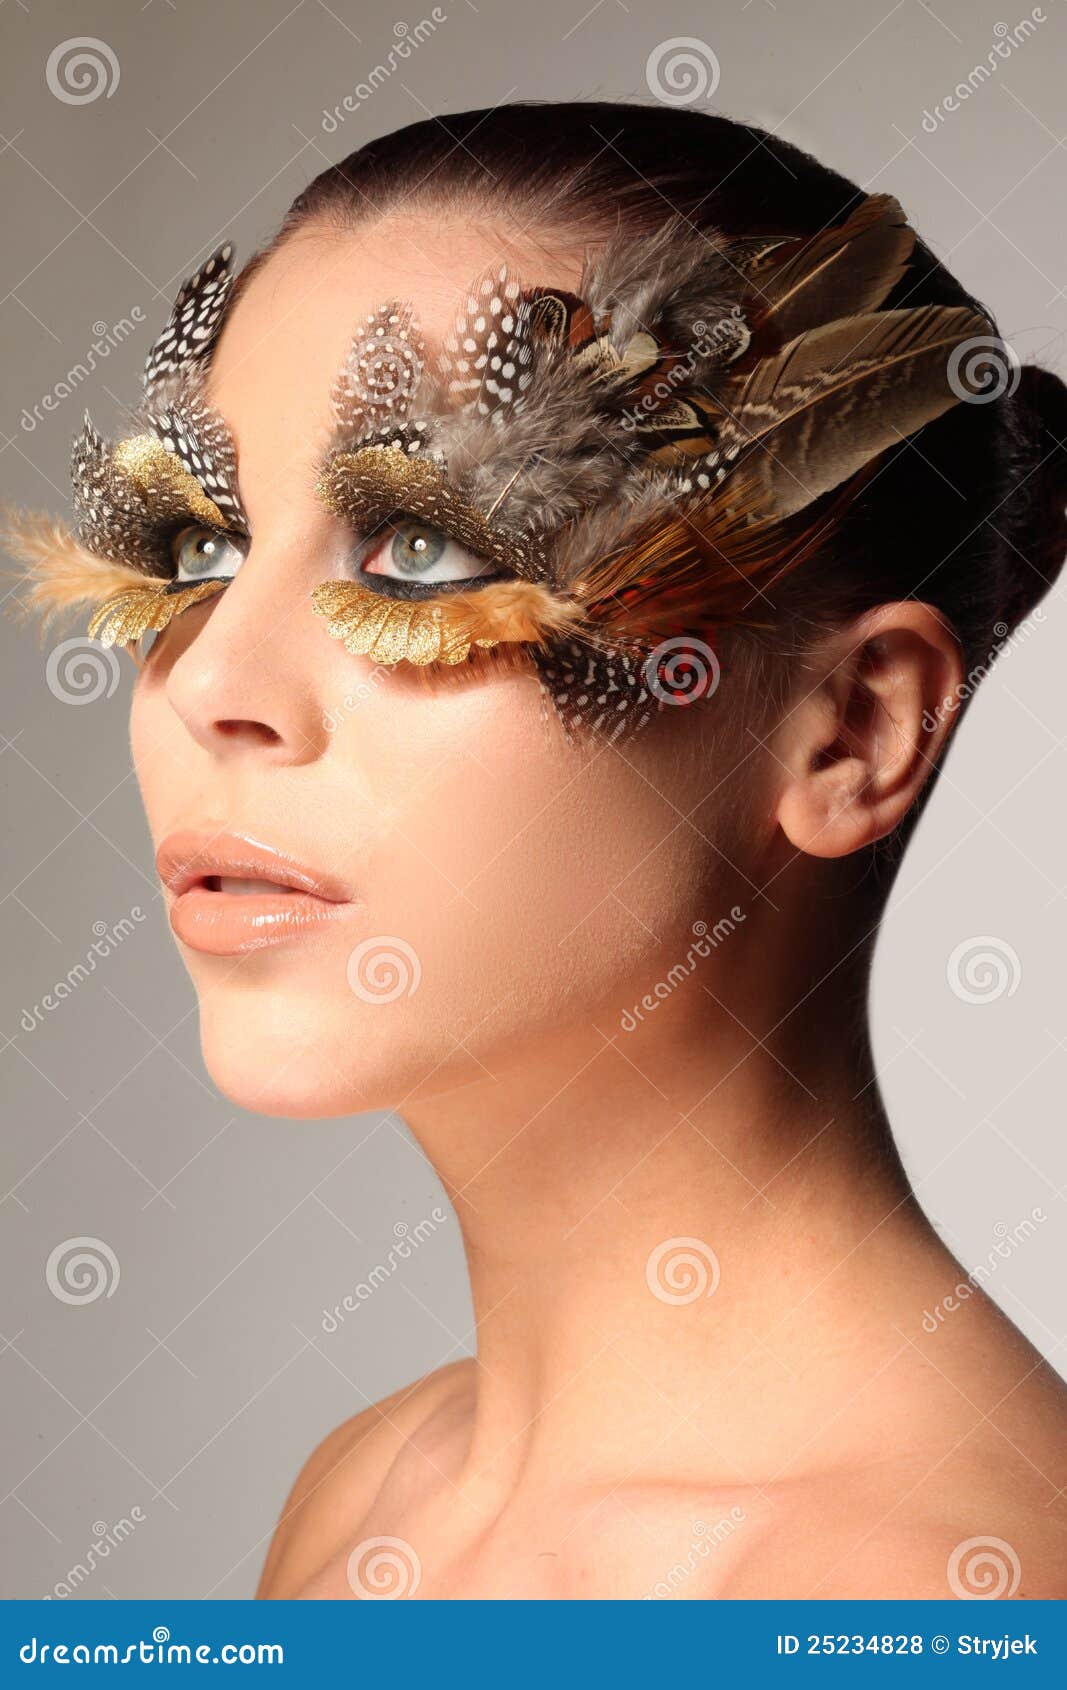 Decorative Feather Make Up Like The Wing Of A Bird Stock